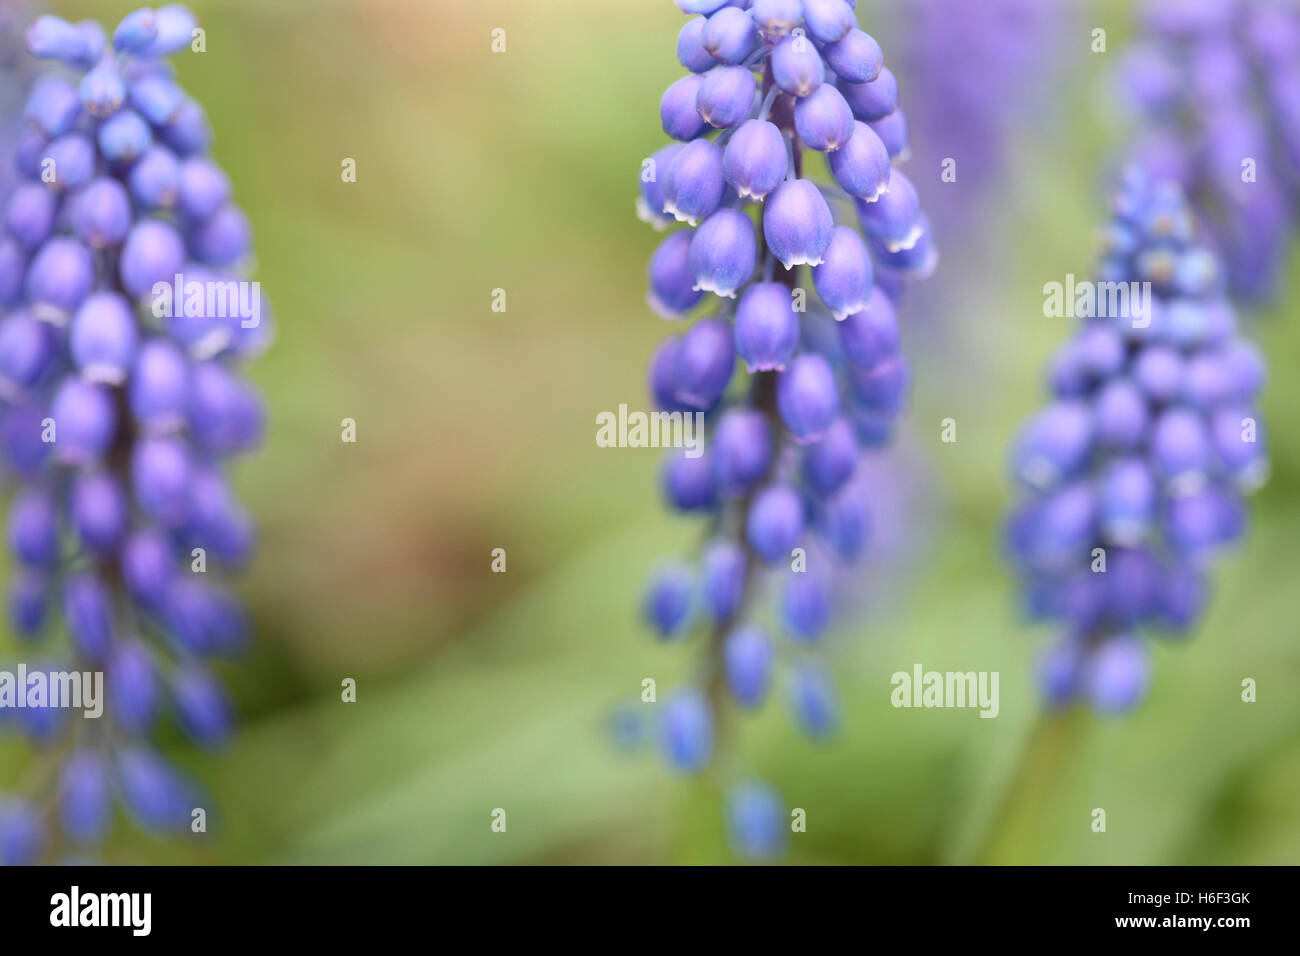 early giant, muscari - distinctive bell-shaped flowering spike of early spring colour Jane Ann Butler Photography JABP1671 Stock Photo